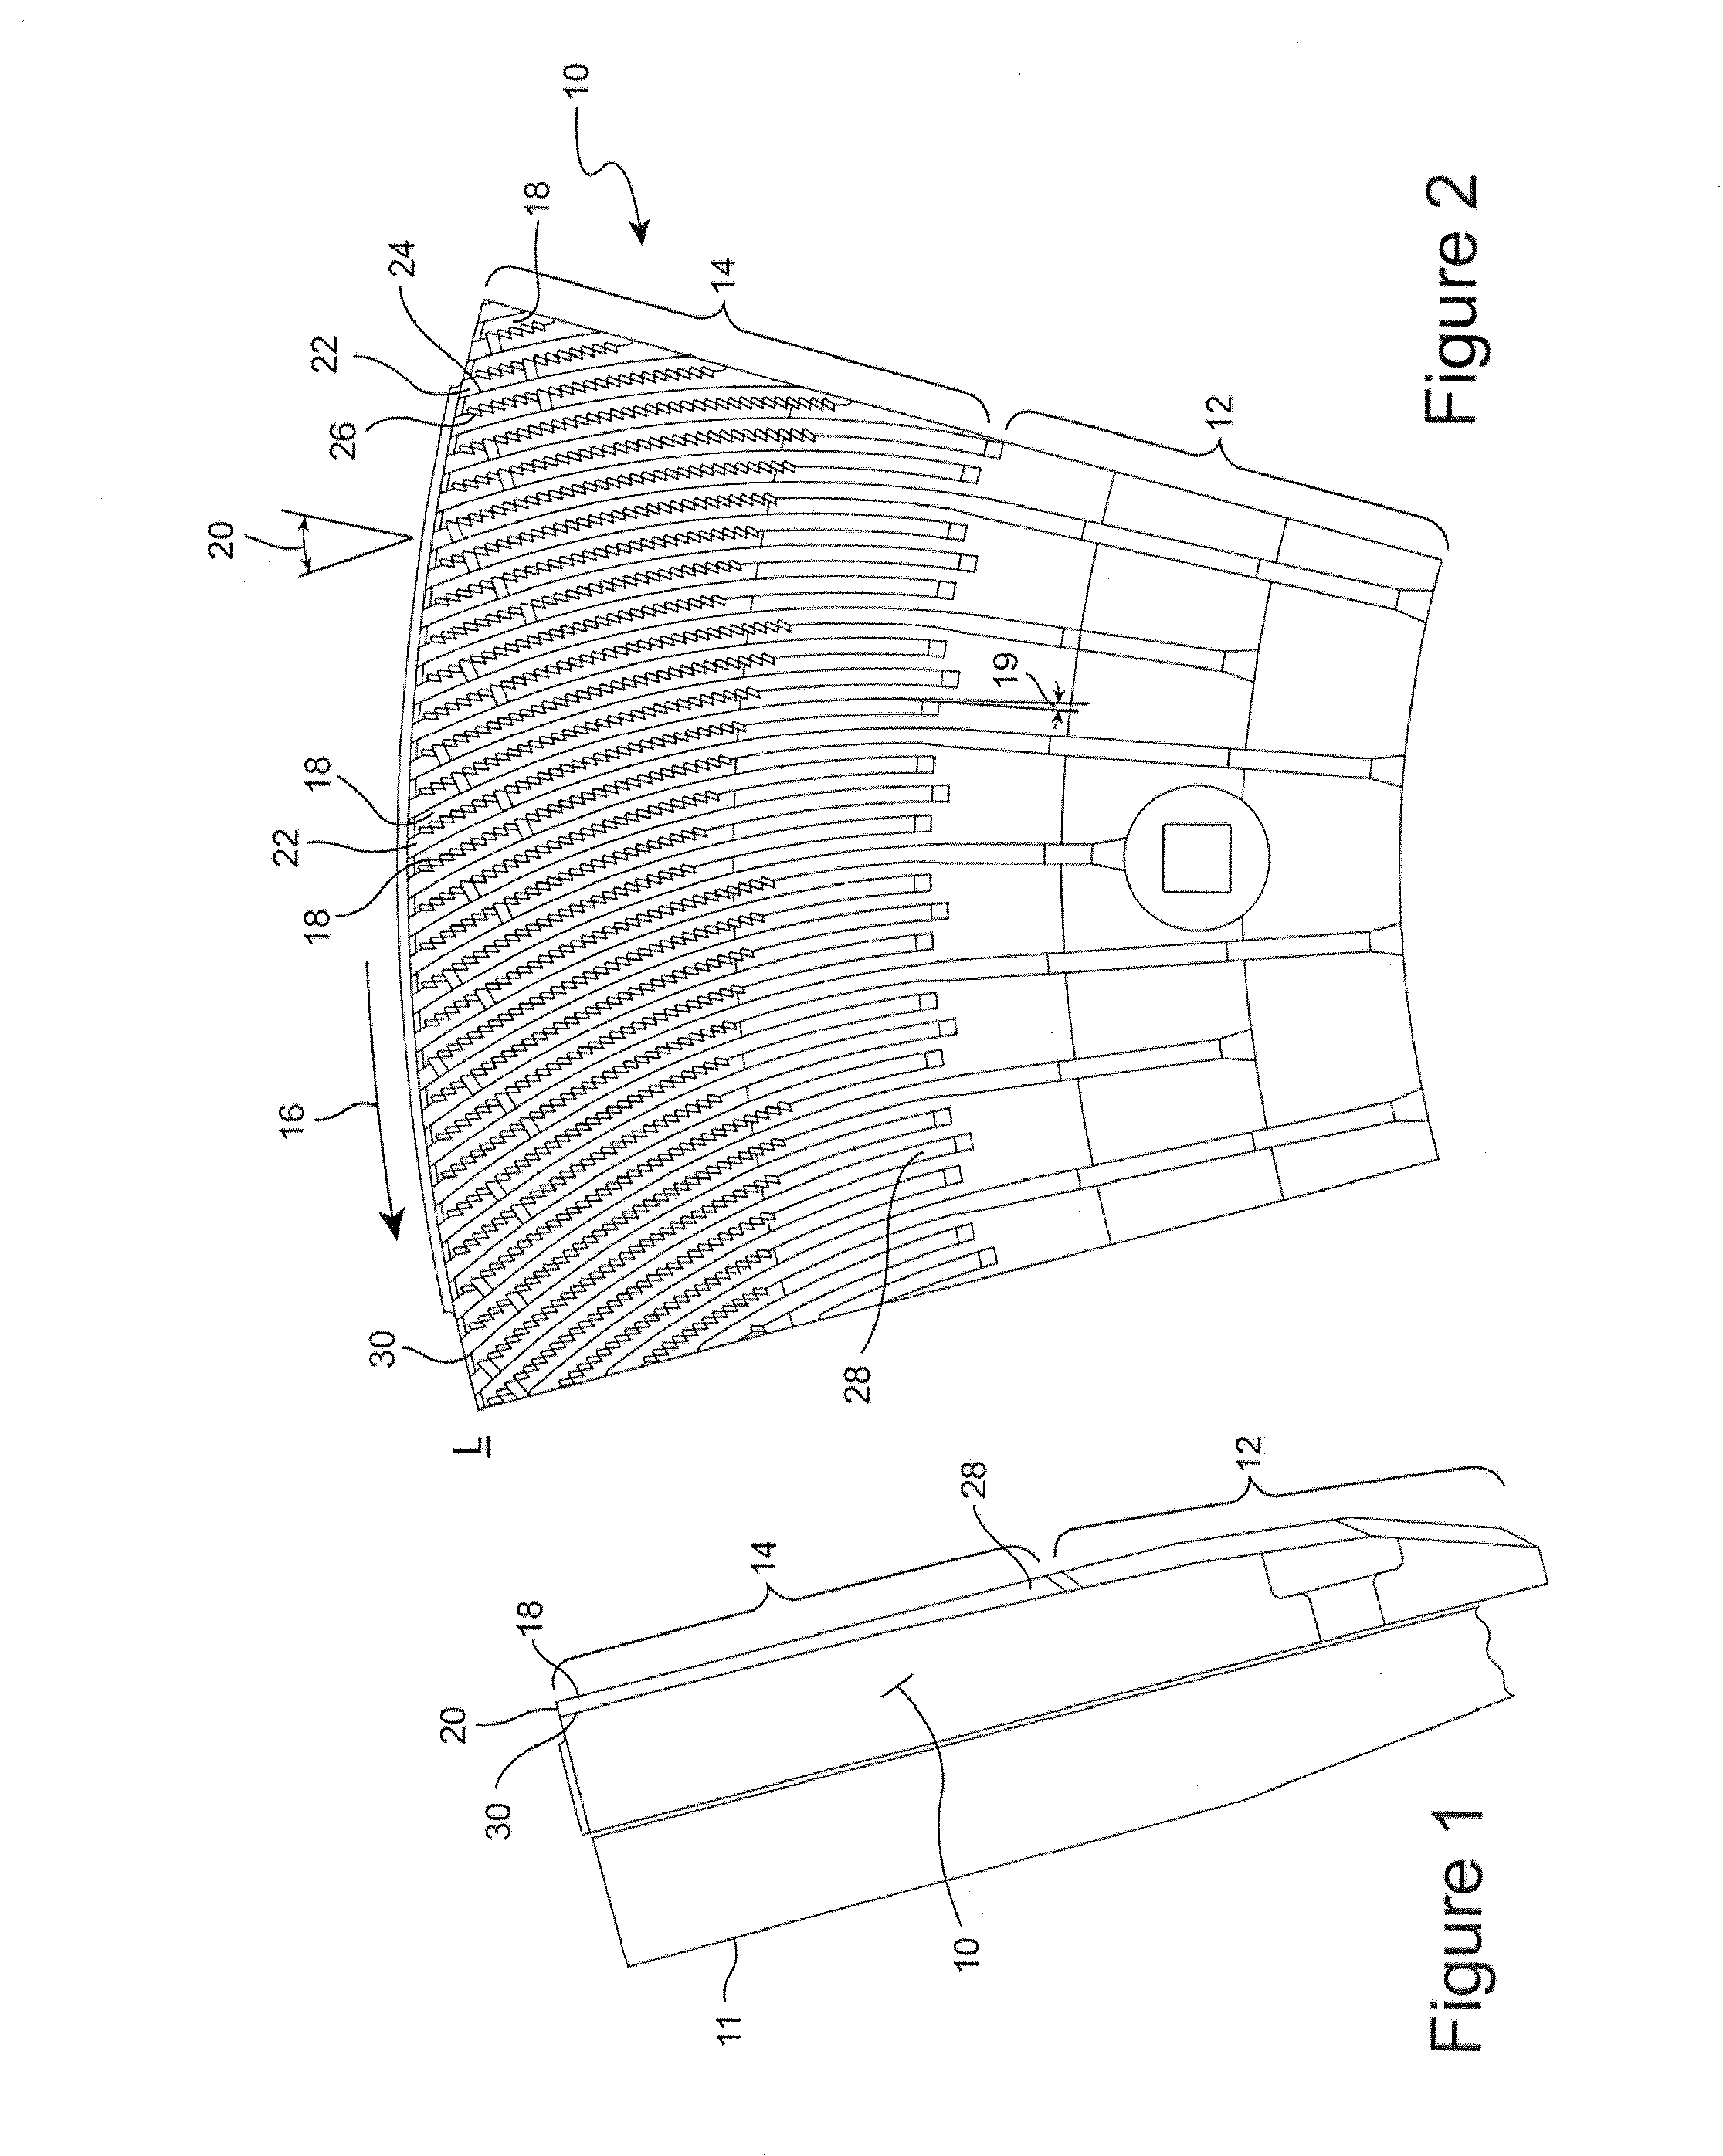 Rotor refiner plate element for counter-rotating refiner having curved bars and serrated leading edges